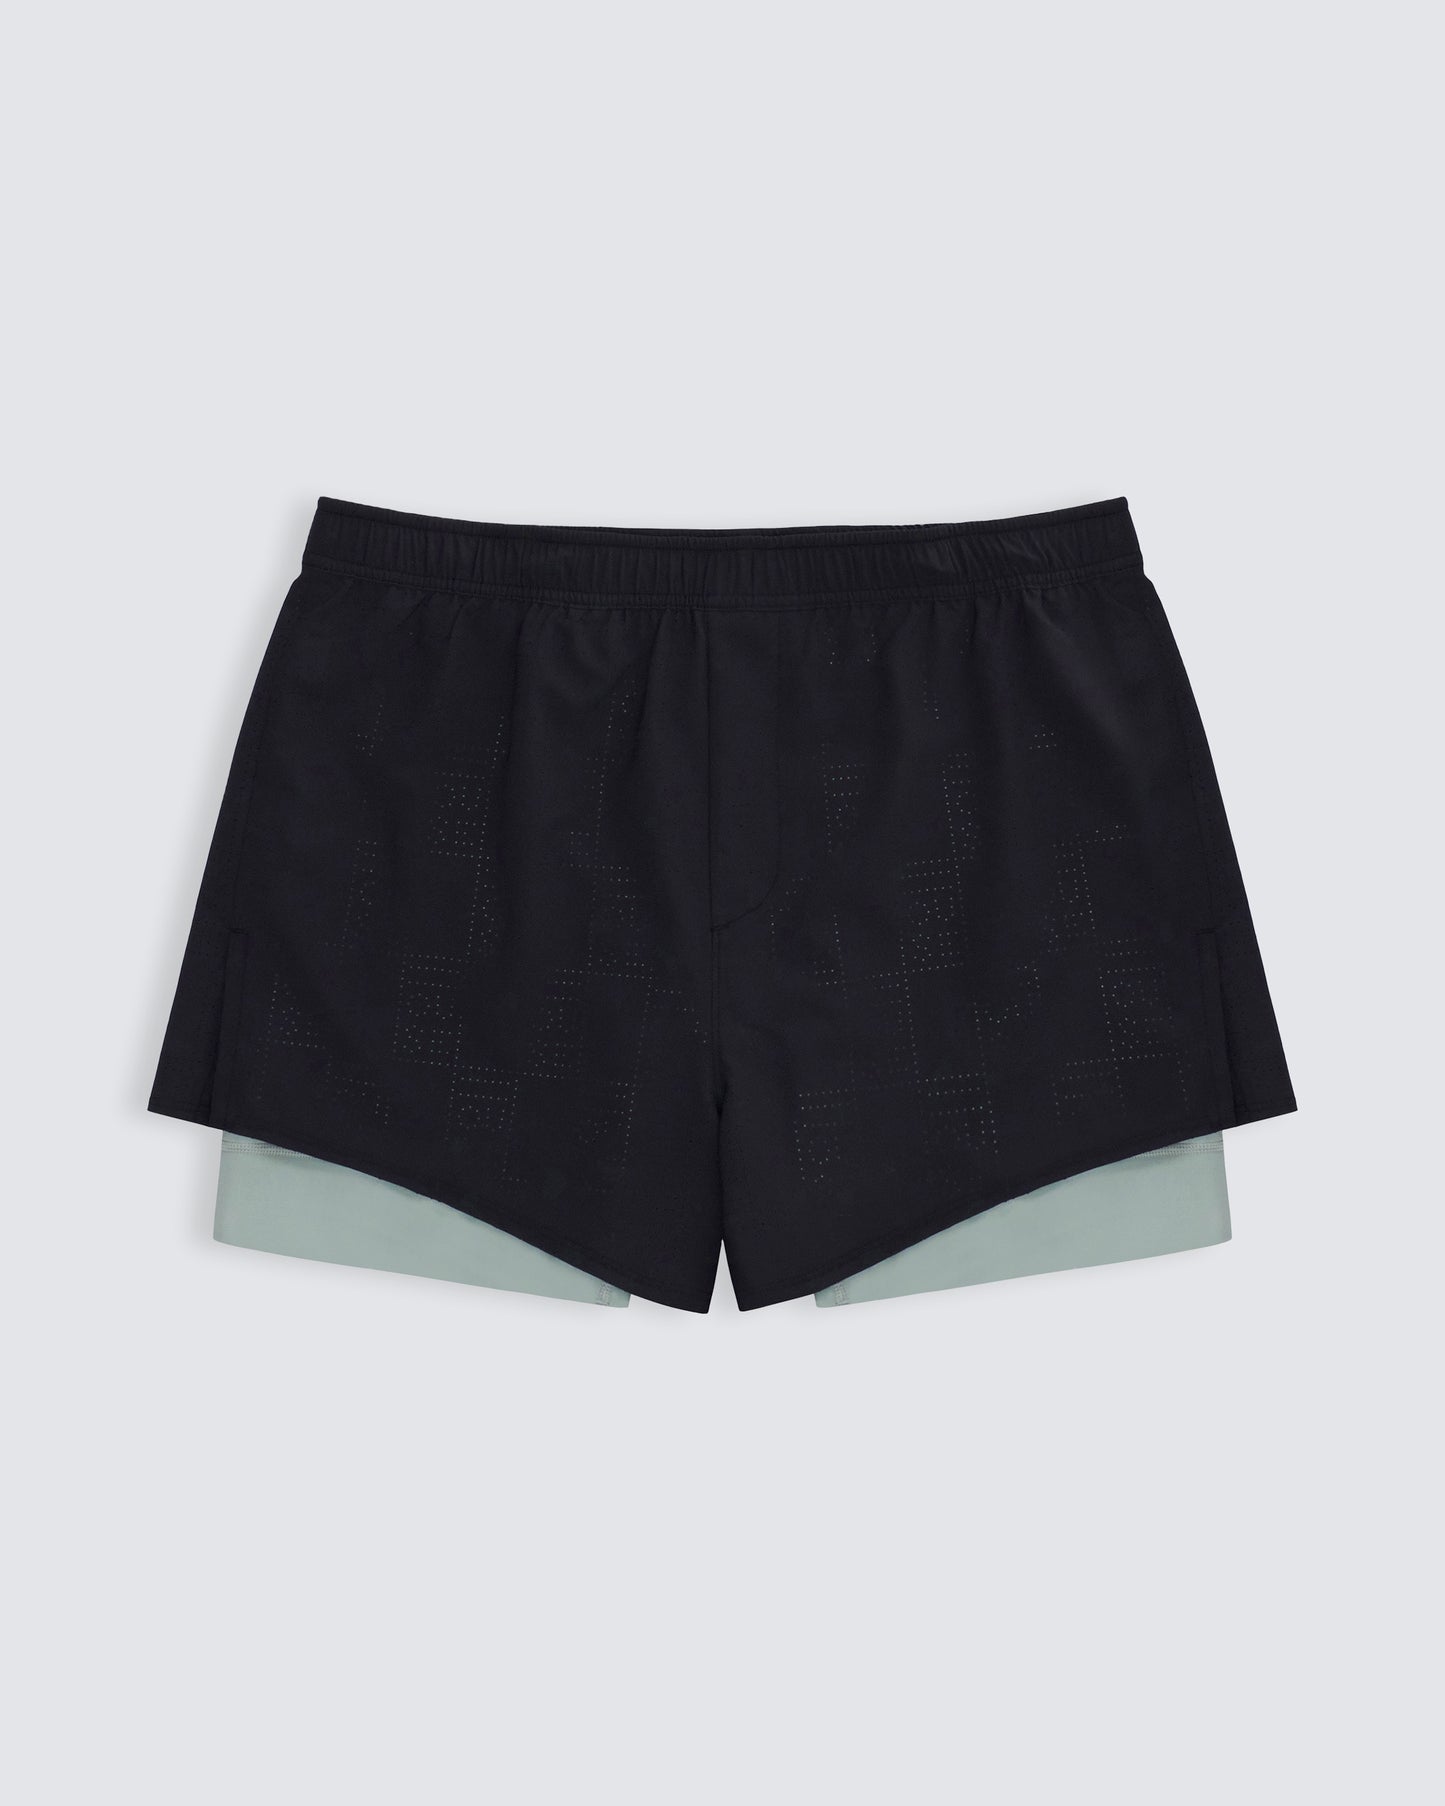 Perforated 4" Lined Short - Black/Sea Green